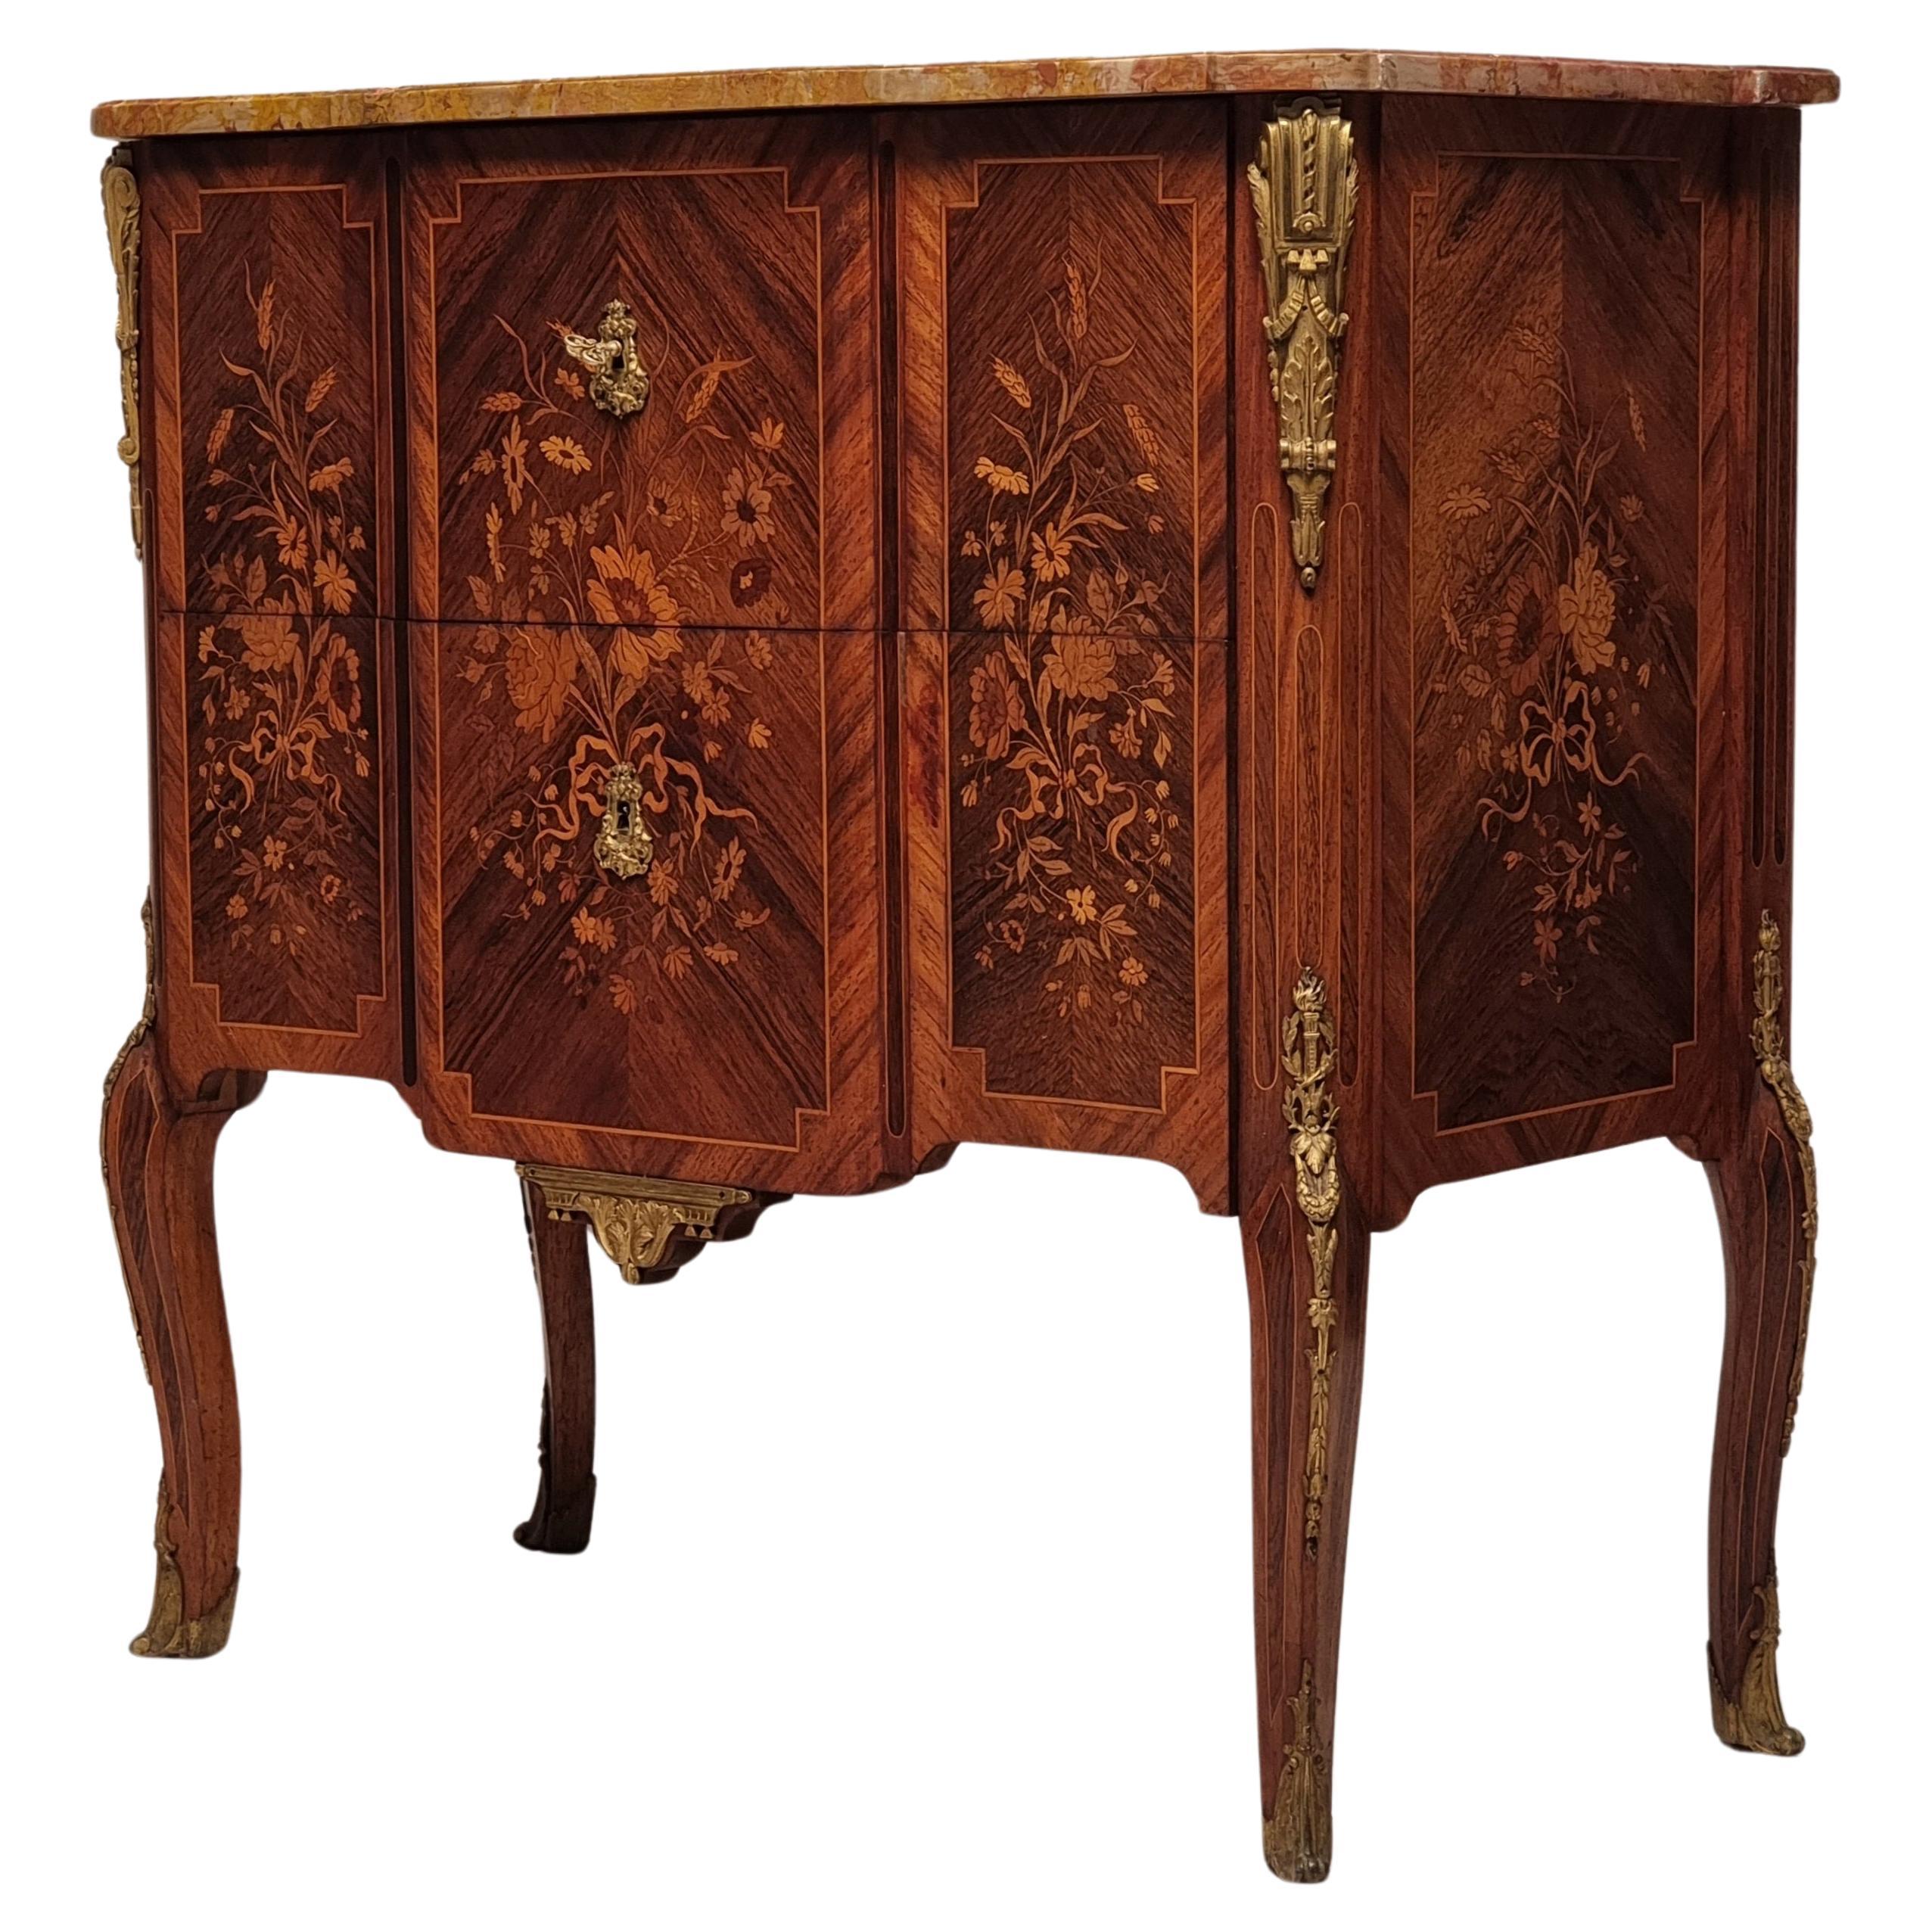 Transition Style Commode Napoleon III Period - Floral Marquetry - Rosewood - 19t